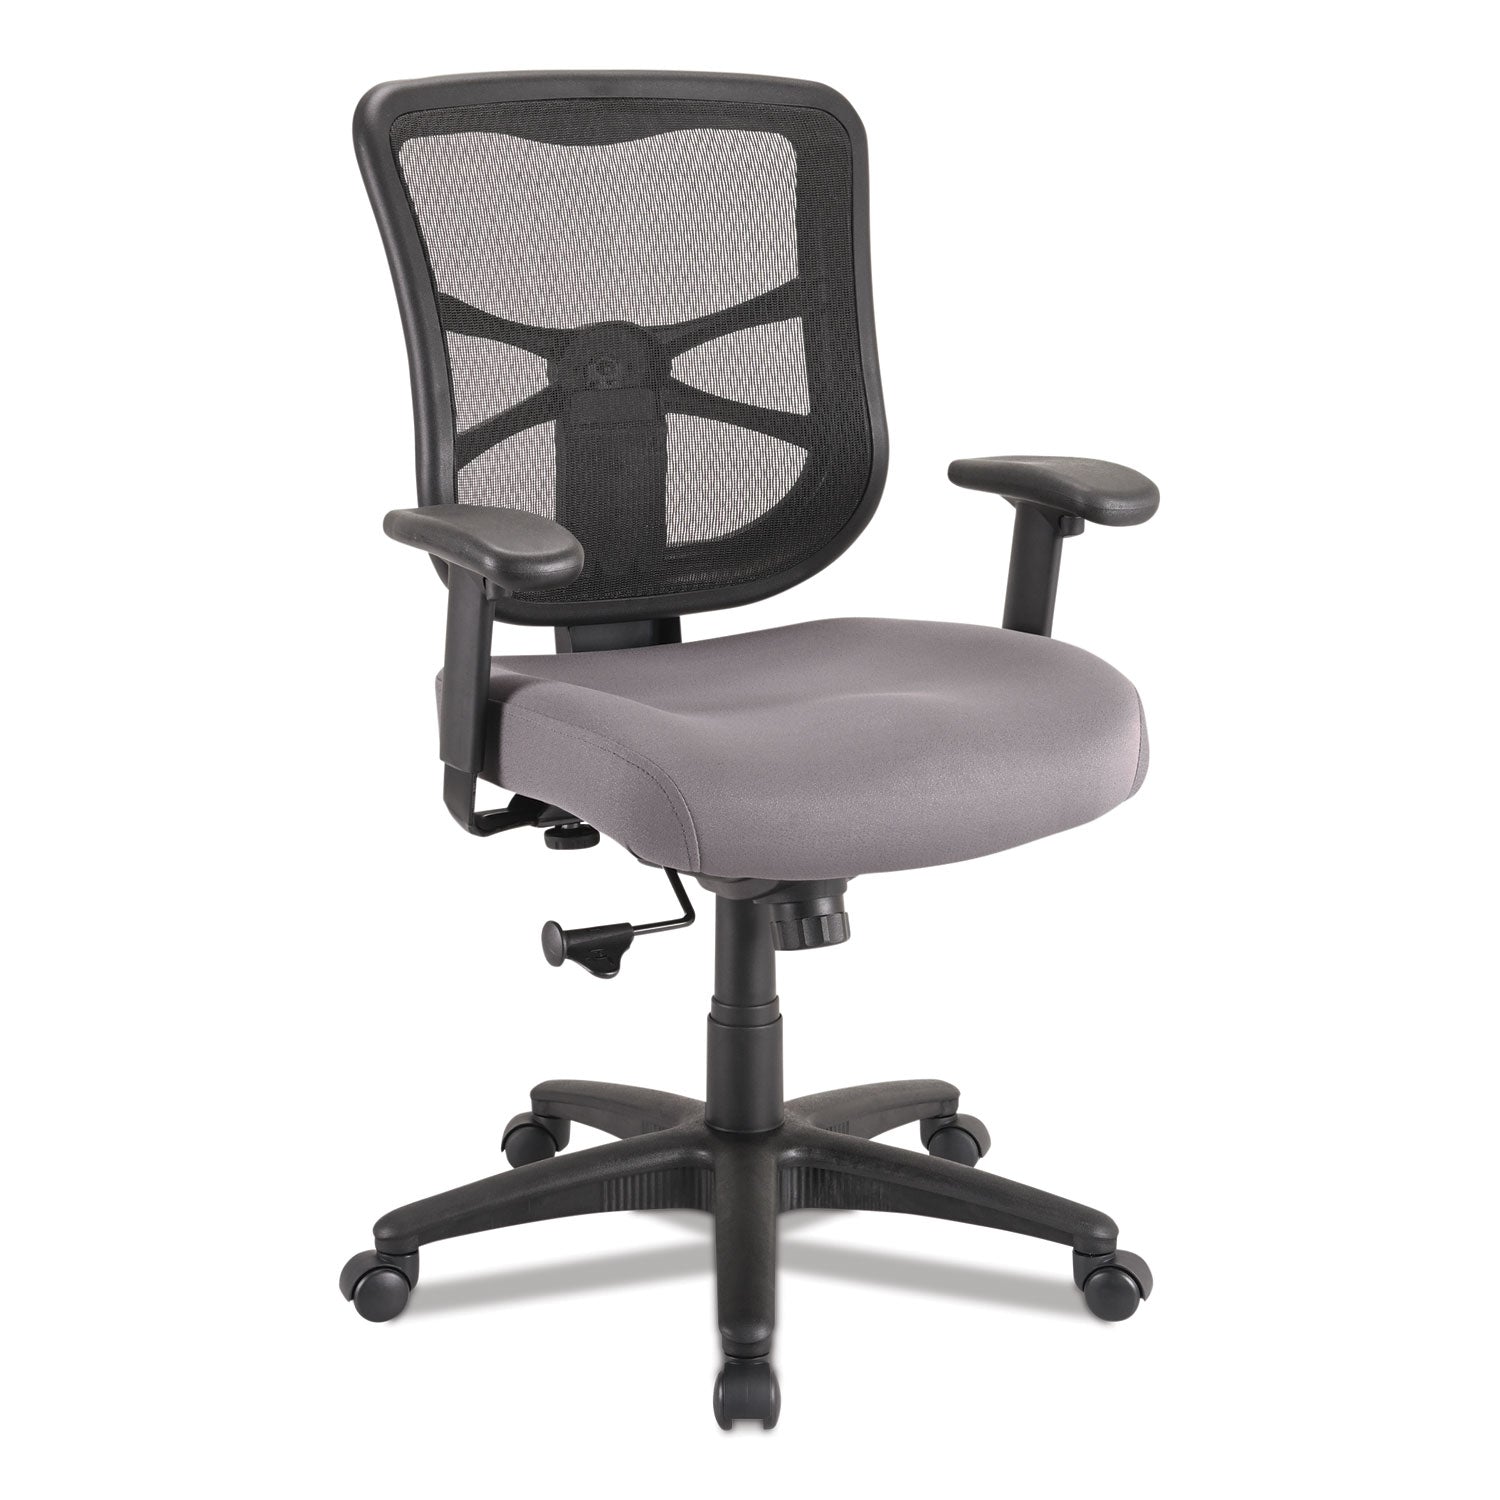 alera-elusion-series-mesh-mid-back-swivel-tilt-chair-supports-up-to-275-lb-179-to-218-seat-height-gray-seat_aleel42bme40b - 1